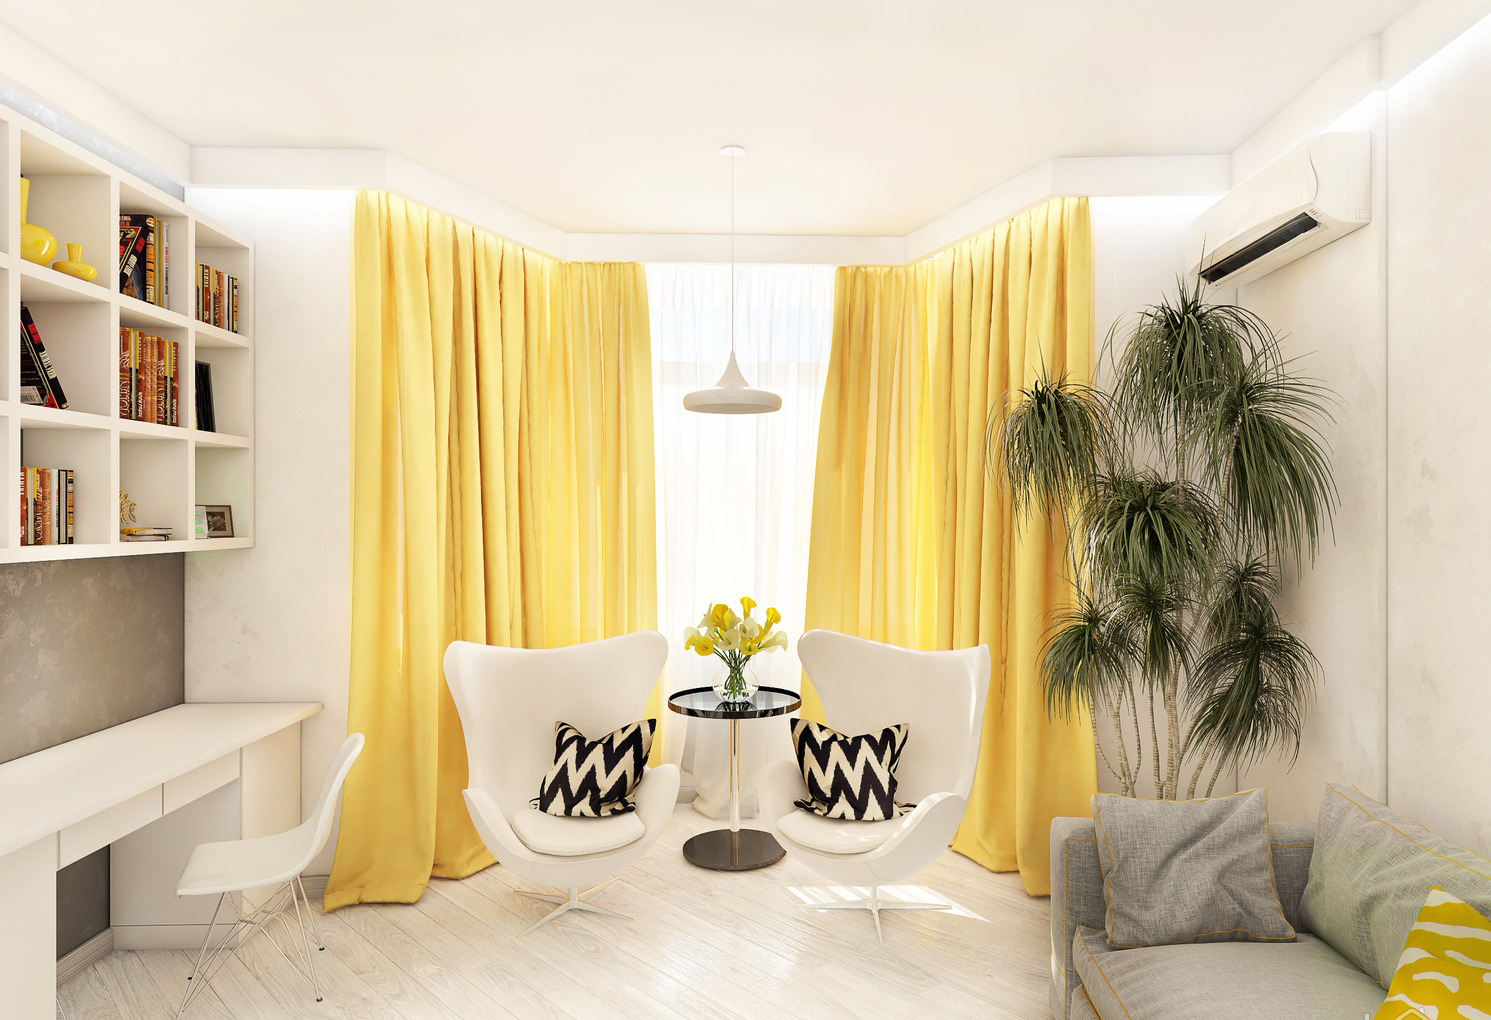 An example of using light yellow in the interior of an apartment